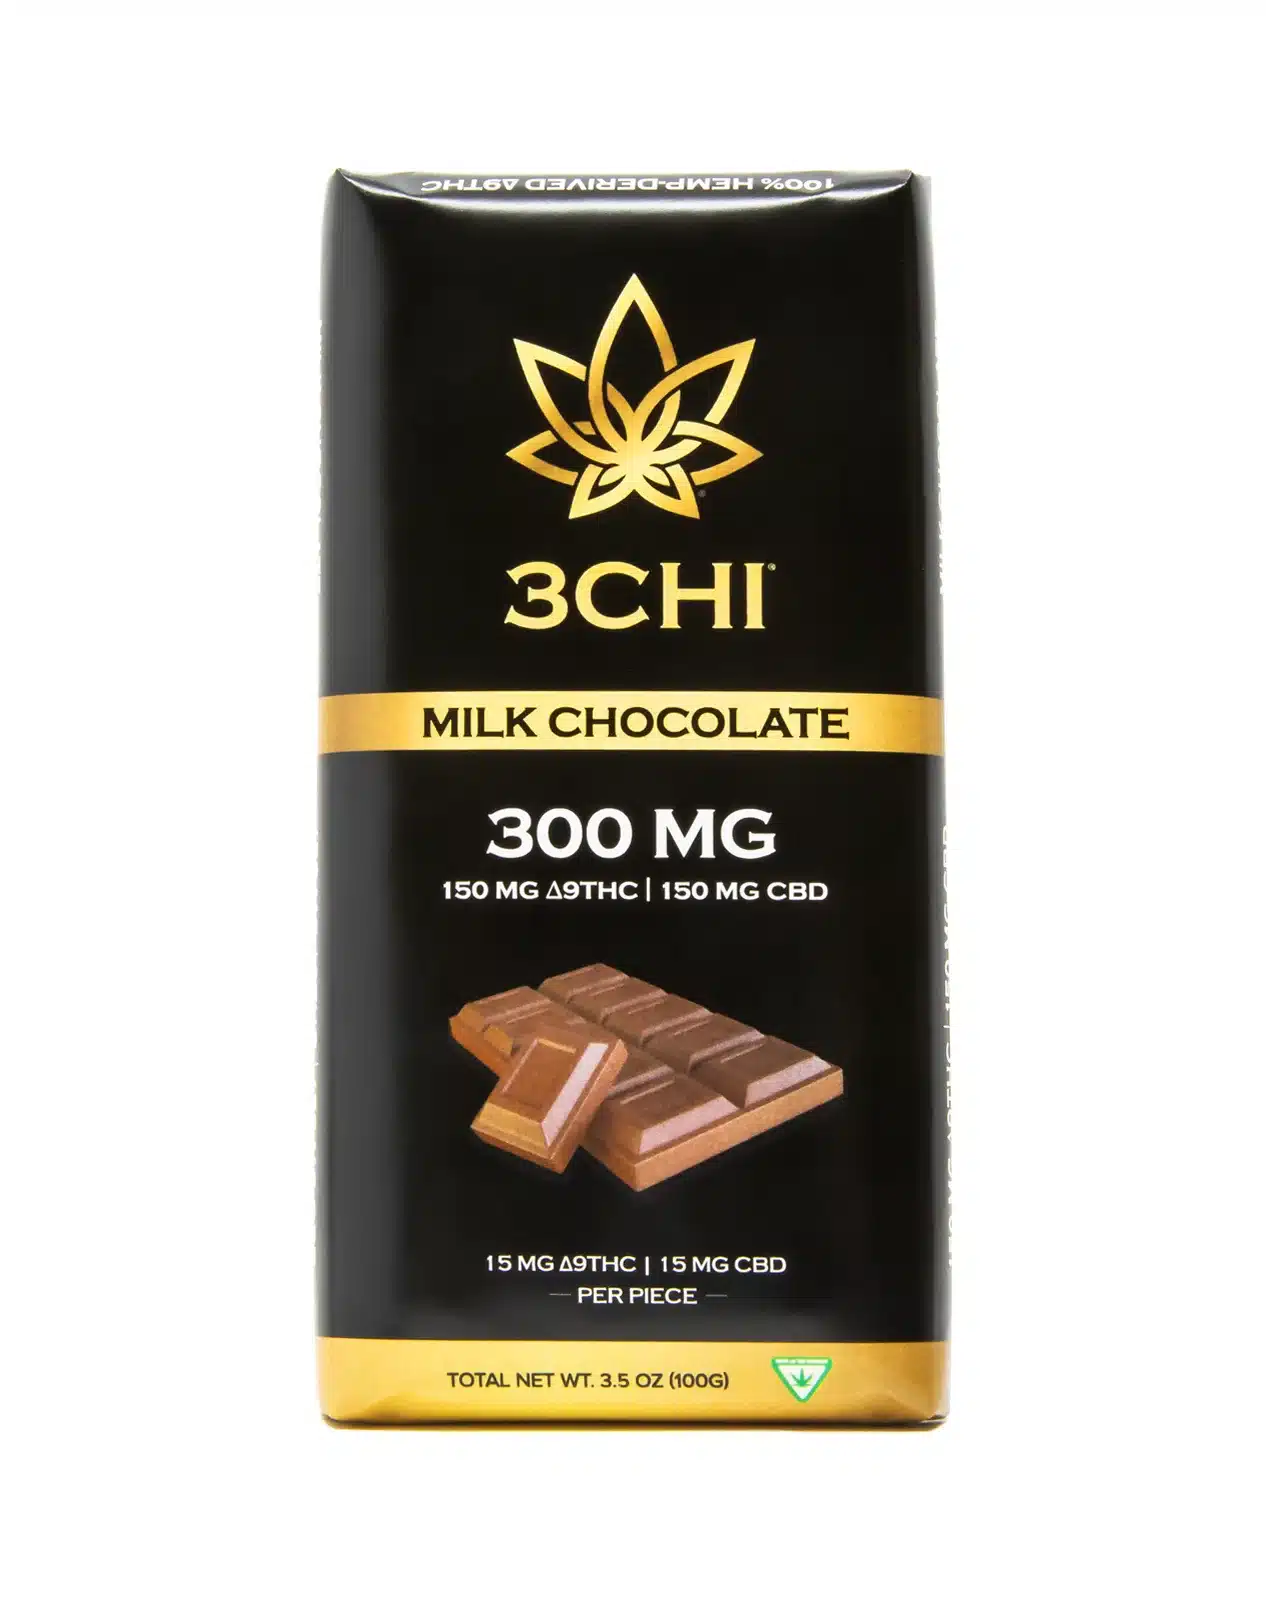 Delta 9 THC Milk Chocolate Bar - When it comes to Delta 9 THC edibles, only 3CHI offers the best. Our chocolate bars are no exception with their delicious silky texture and rich flavor that are perfect for when you need 'a little something sweet'. Packed with 15mg of hemp-derived, dispensary-grade Delta 9 and 15mg of USA-grown CBD per piece, each chocolate square gives you a full body and mind adventure, creating a unique and enjoyable experience every time you have one of these sweet treats. Specially-formulated, fast-acting Delta 9 THC edible Dispensary-grade NO hemp taste Non-GMO 15mg Delta 9 THC per chocolate square Potent & long-lasting Made from 100% USA-grown hemp Farm Bill Compliant: <0.3% Delta 9 THC